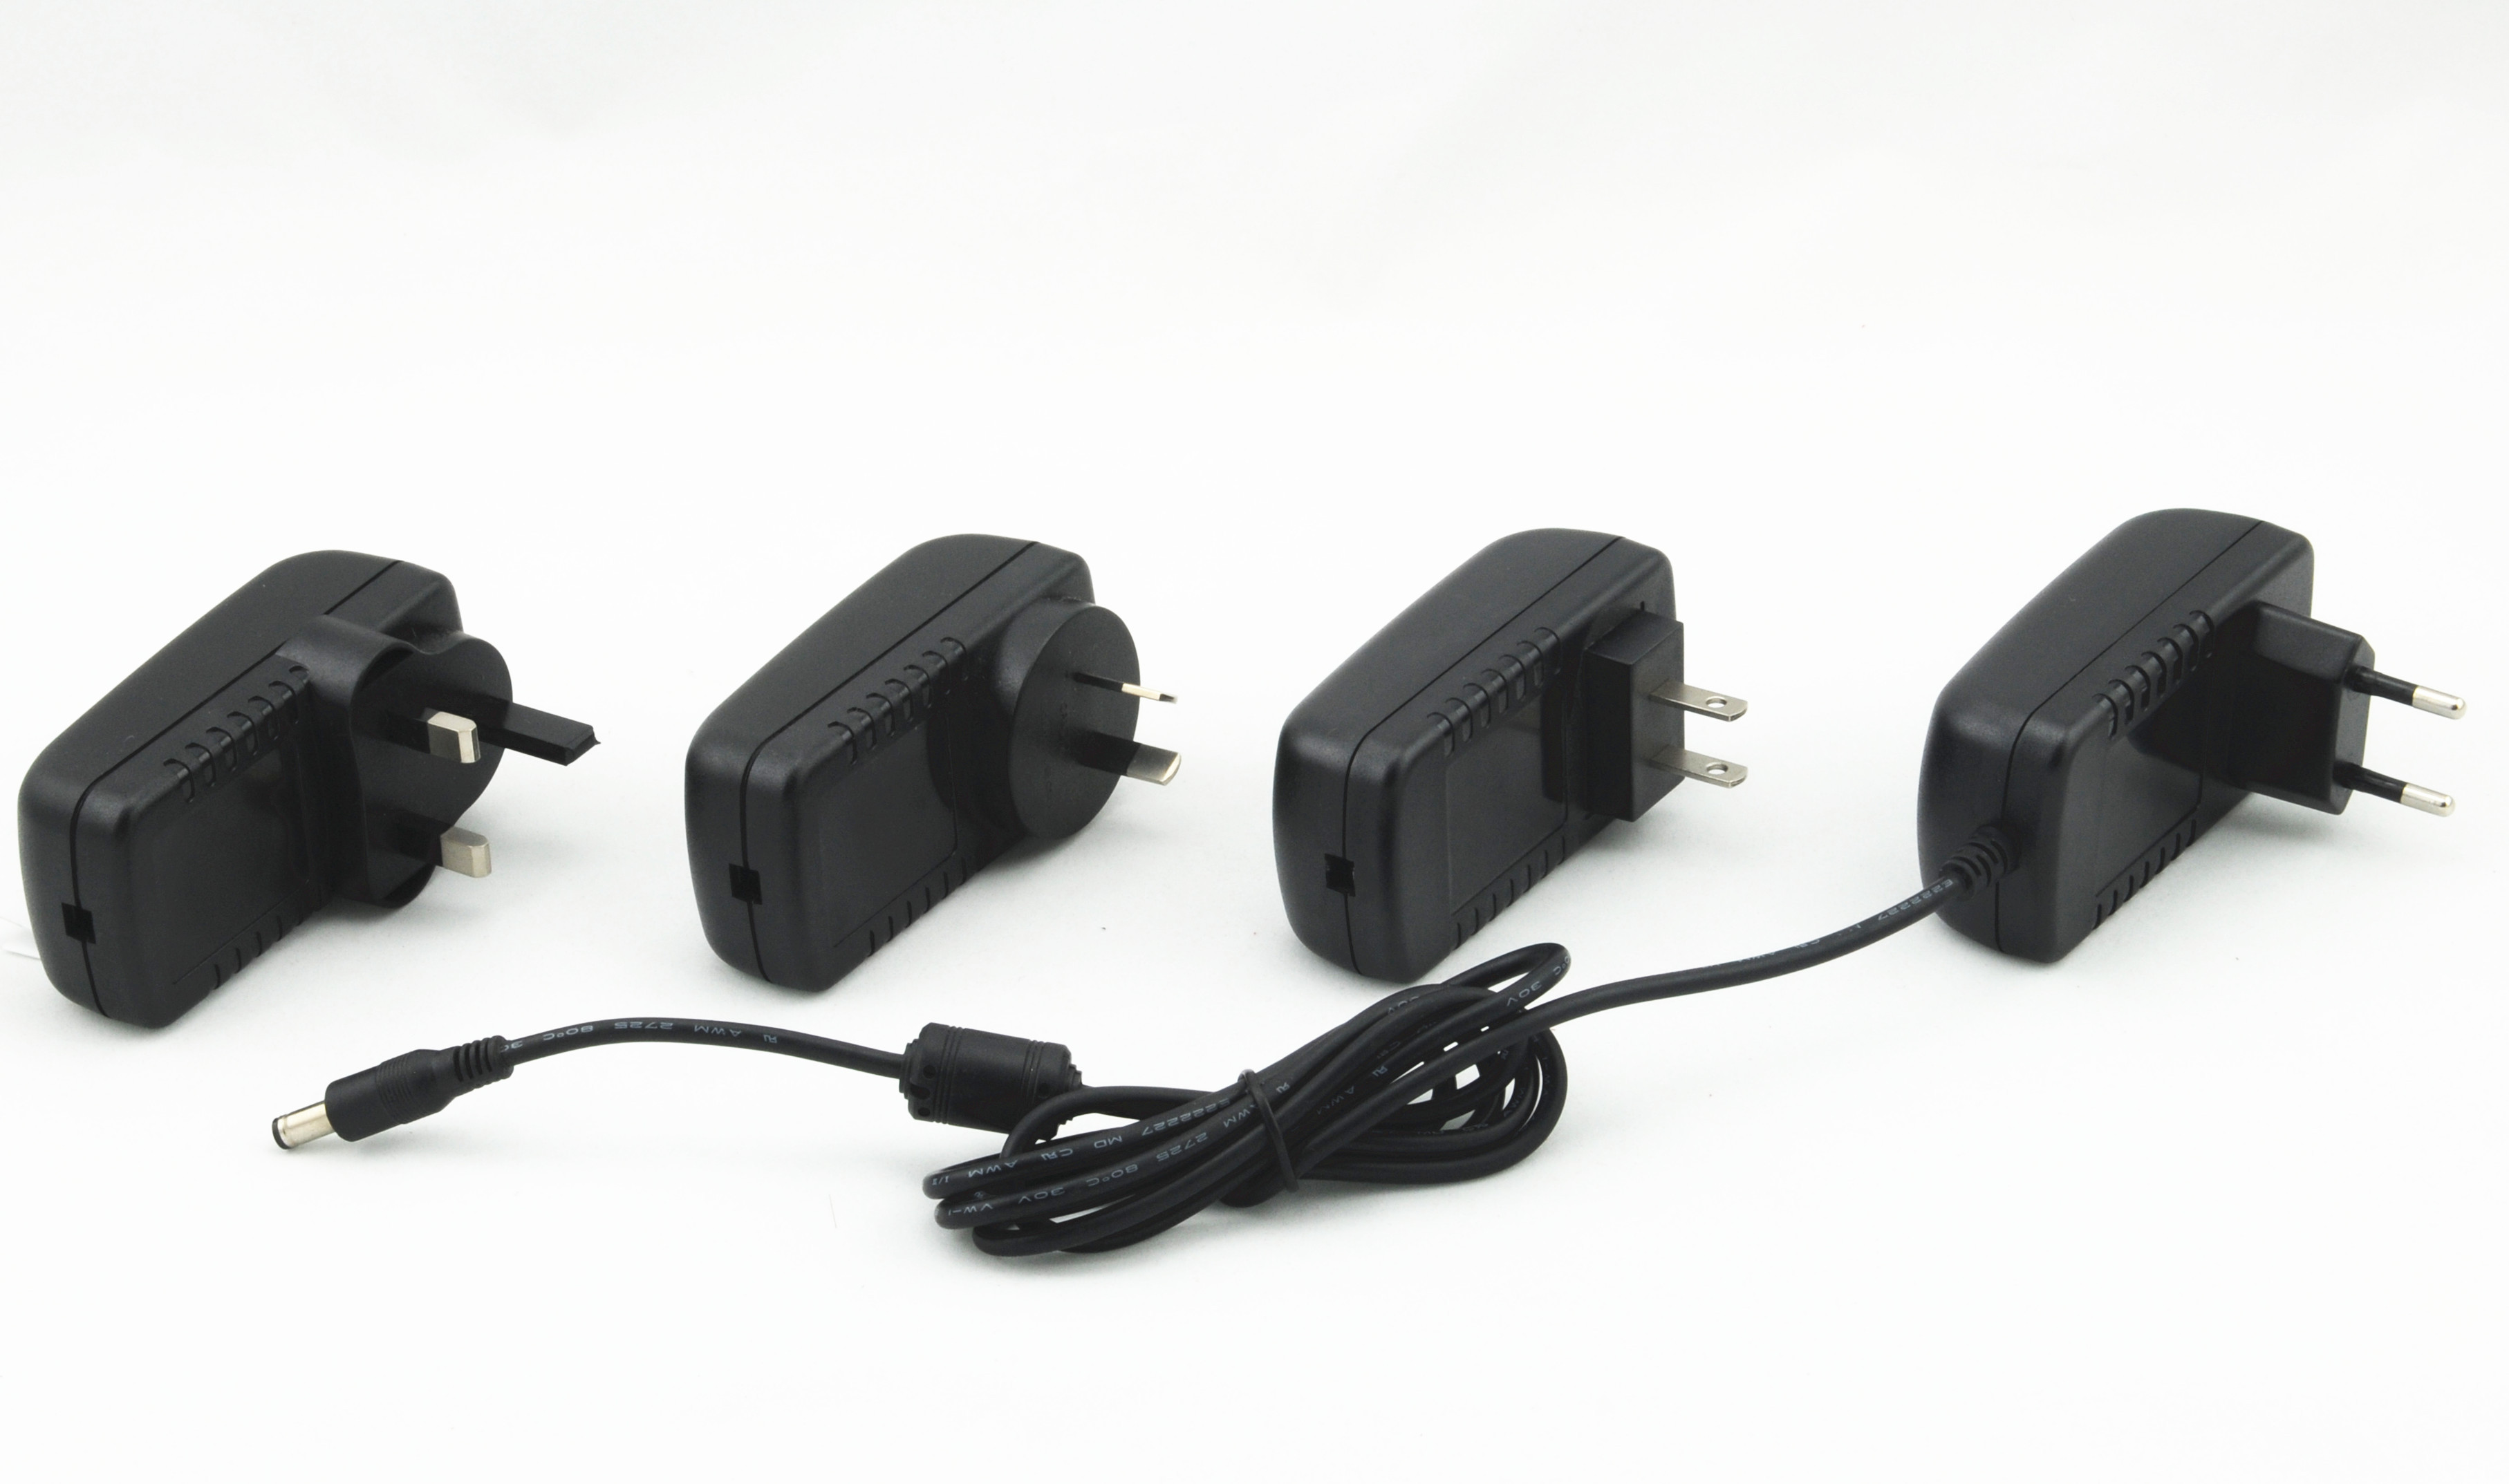 24W DC Output AC Power Adapters for Digital Picture Frame , Video Telephone